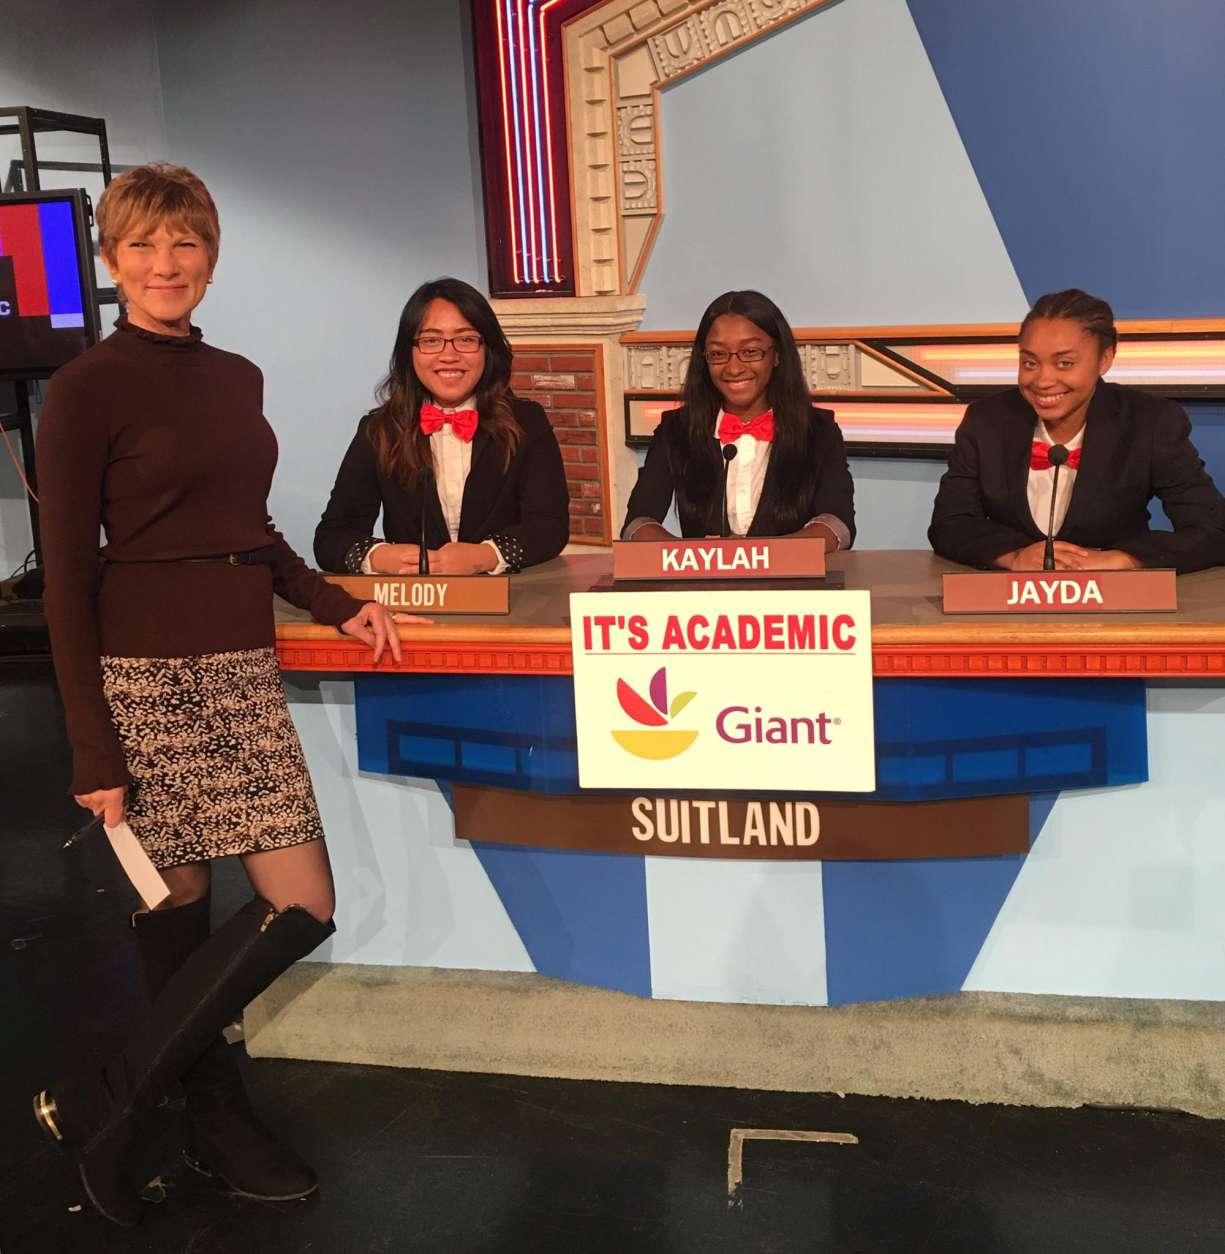 On "It's Academic," Suitland High School competed against Chantilly and West Springfield high schools. The show aired Jan. 21, 2017. (Courtesy Facebook/It's Academic)